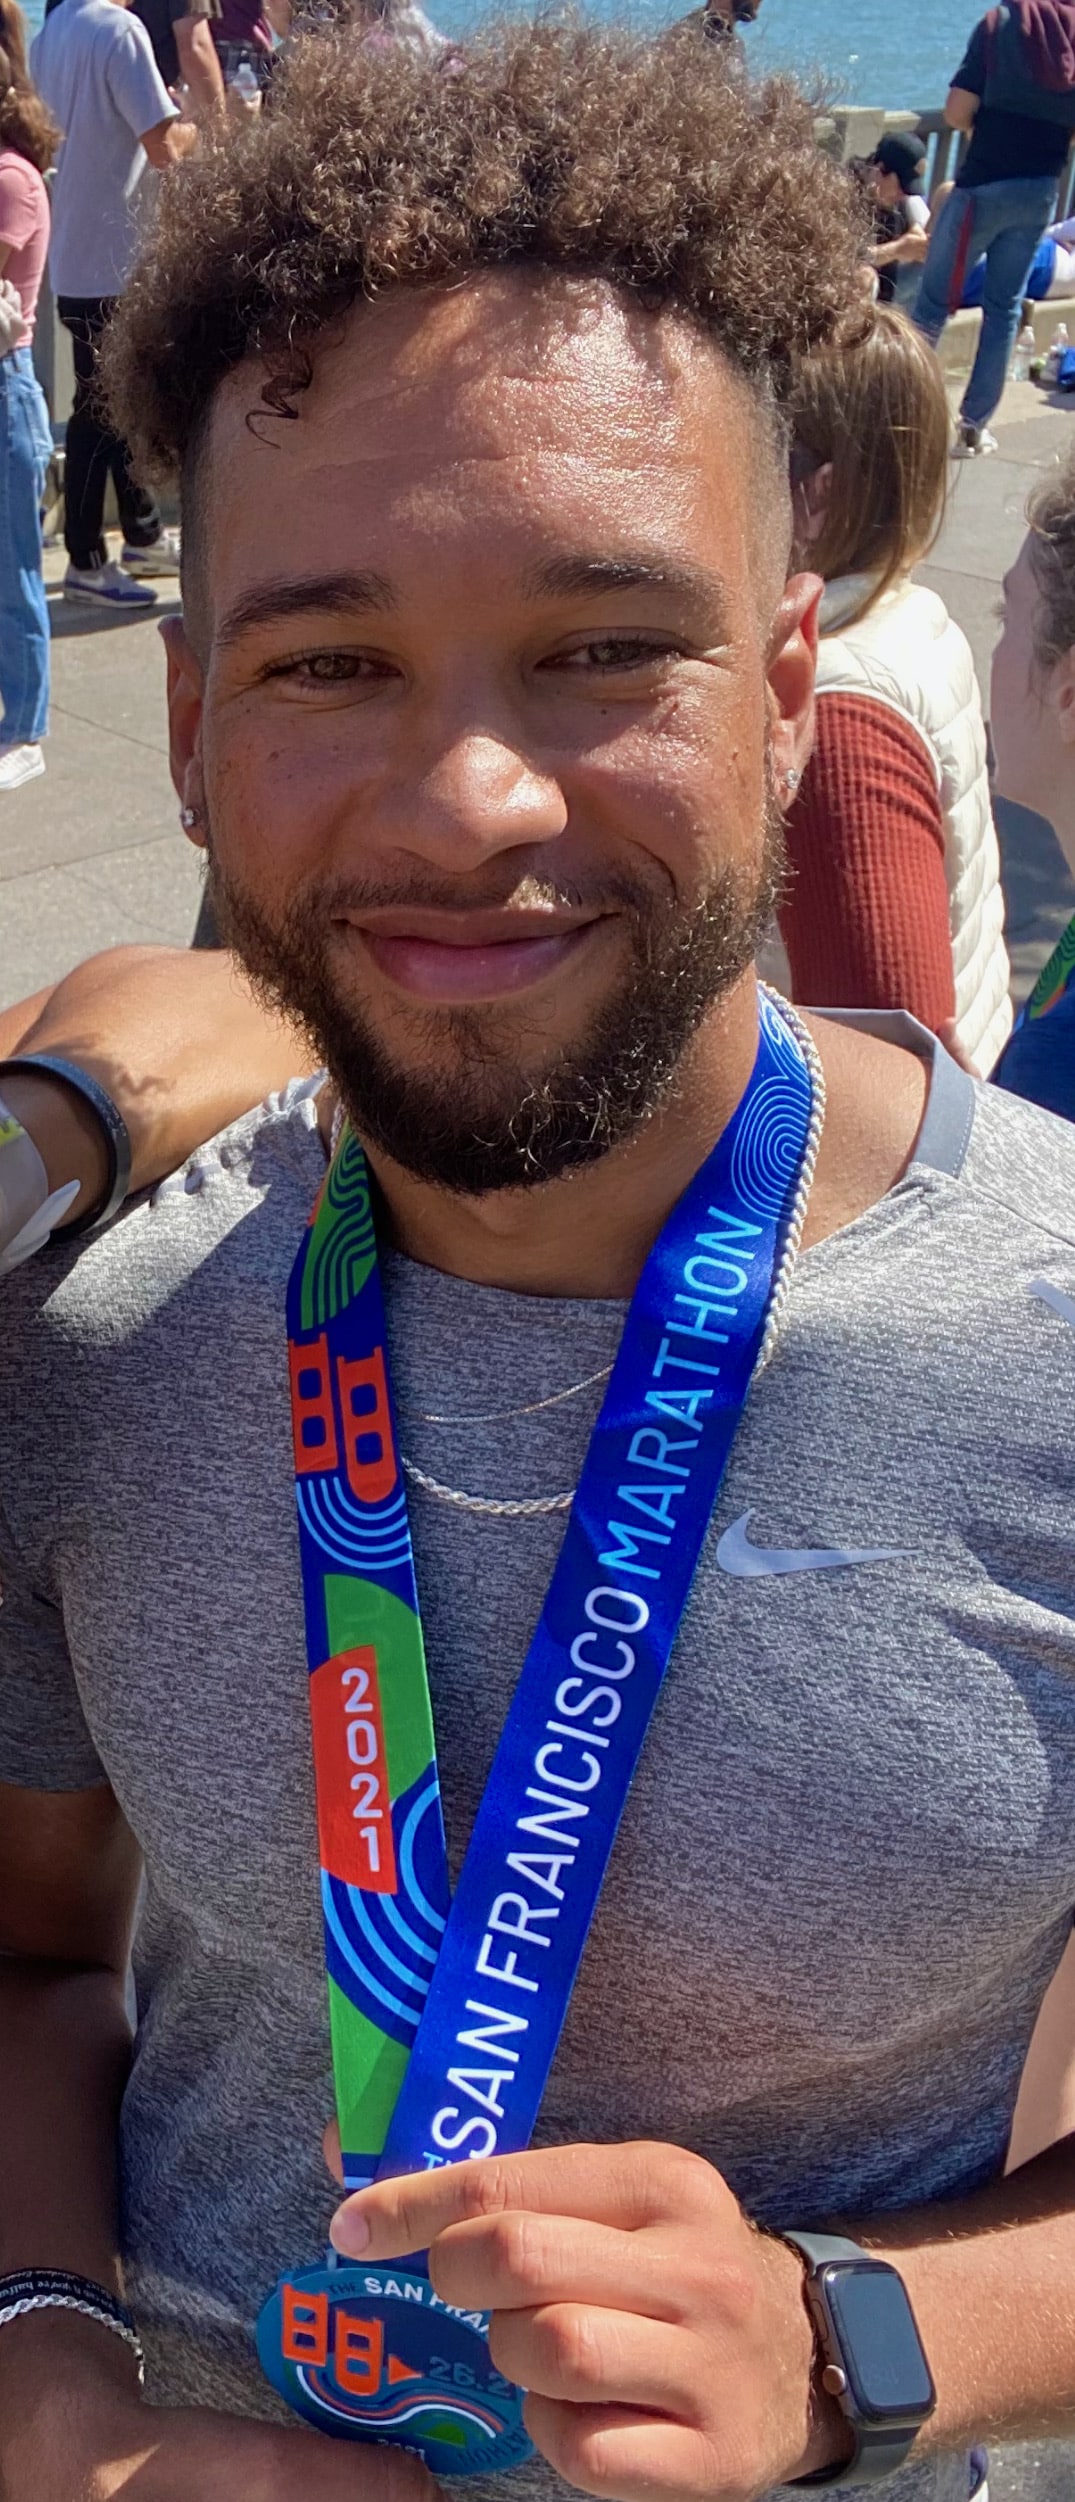 Damian with a medal around his neck after running marathon